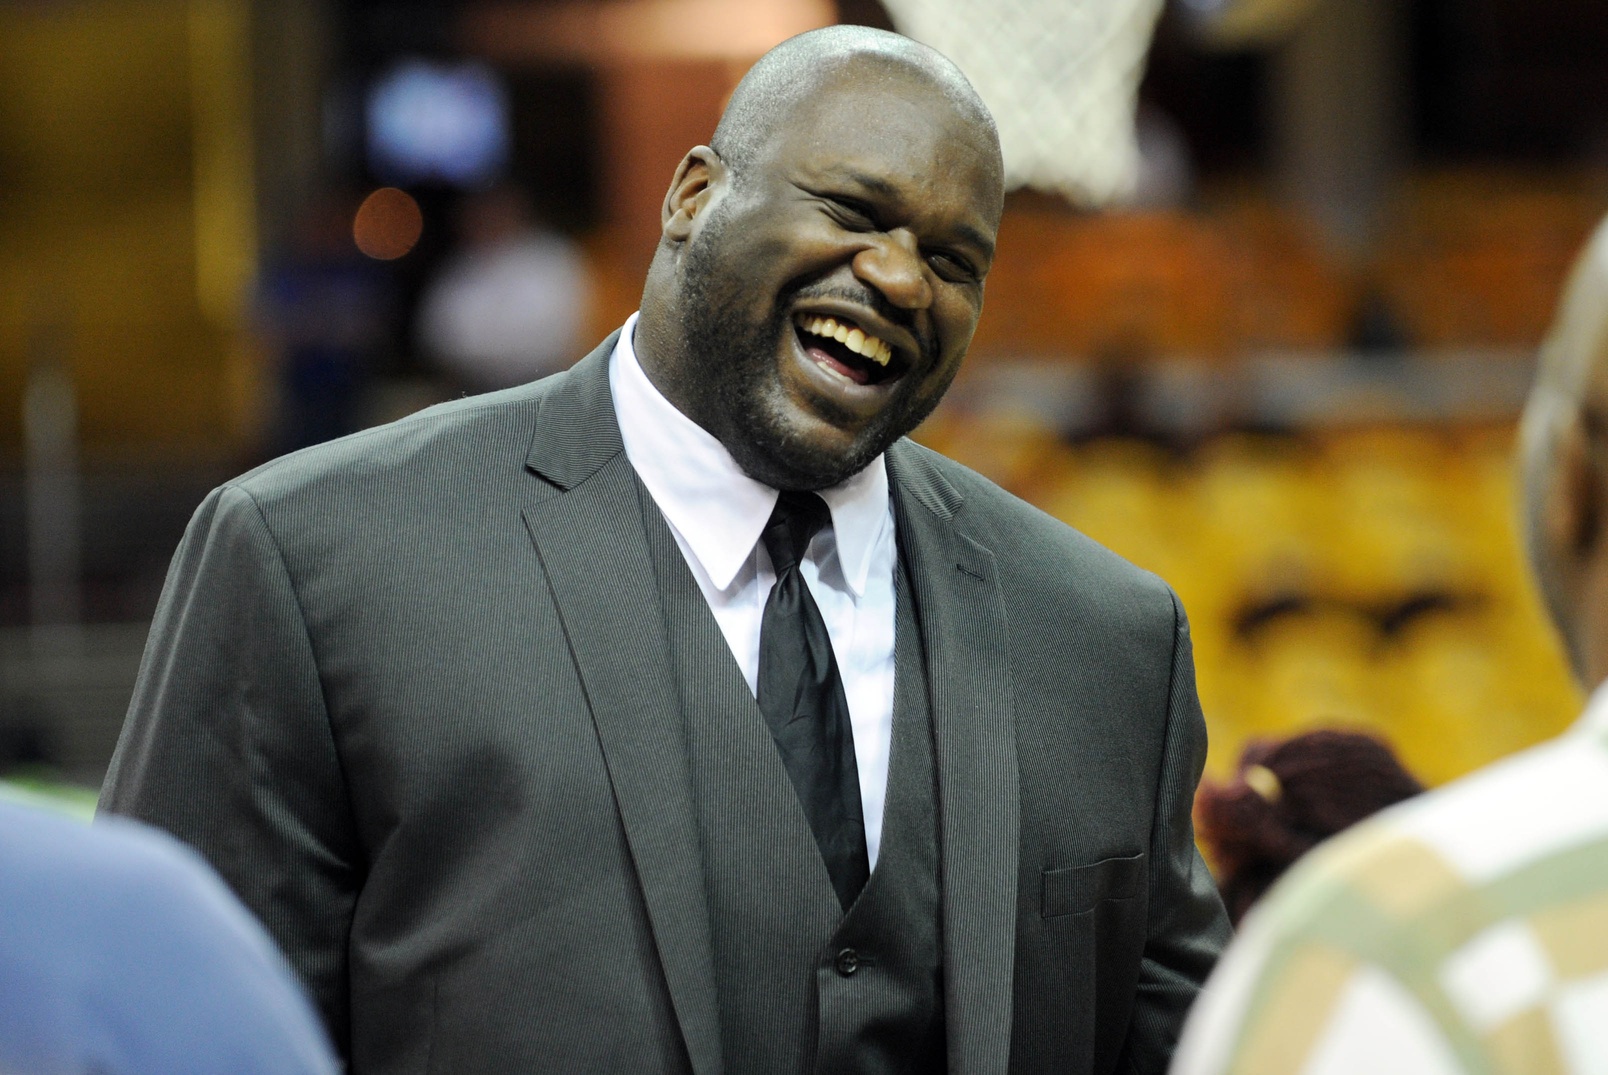 Report: Shaq to perform during MLB’s All-Star Week.